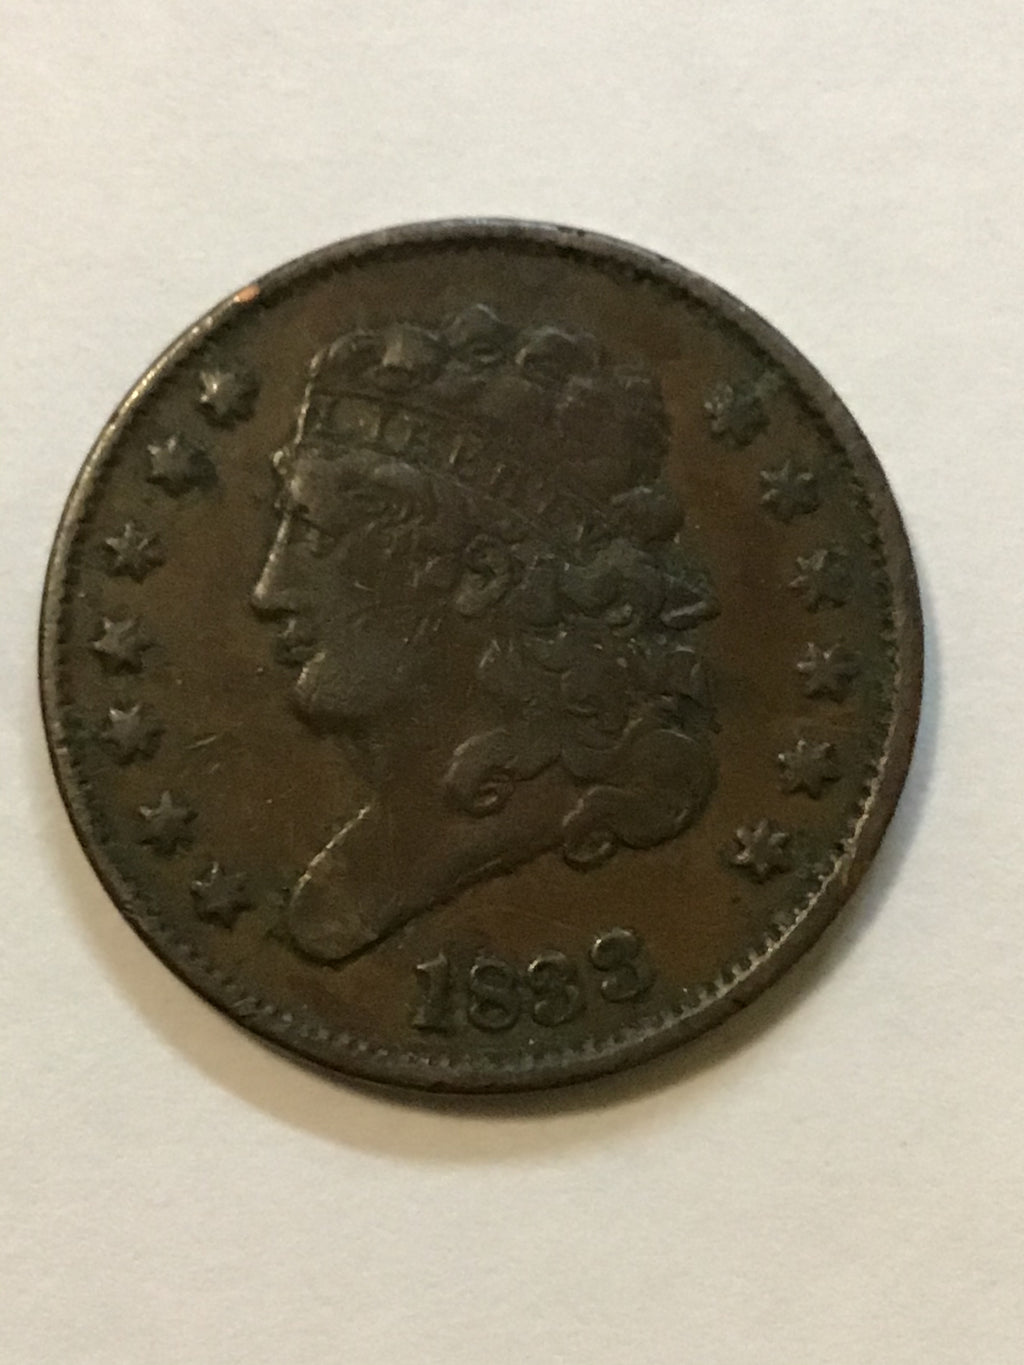 1833 Classic Head Half Cent-Very Low Mintage